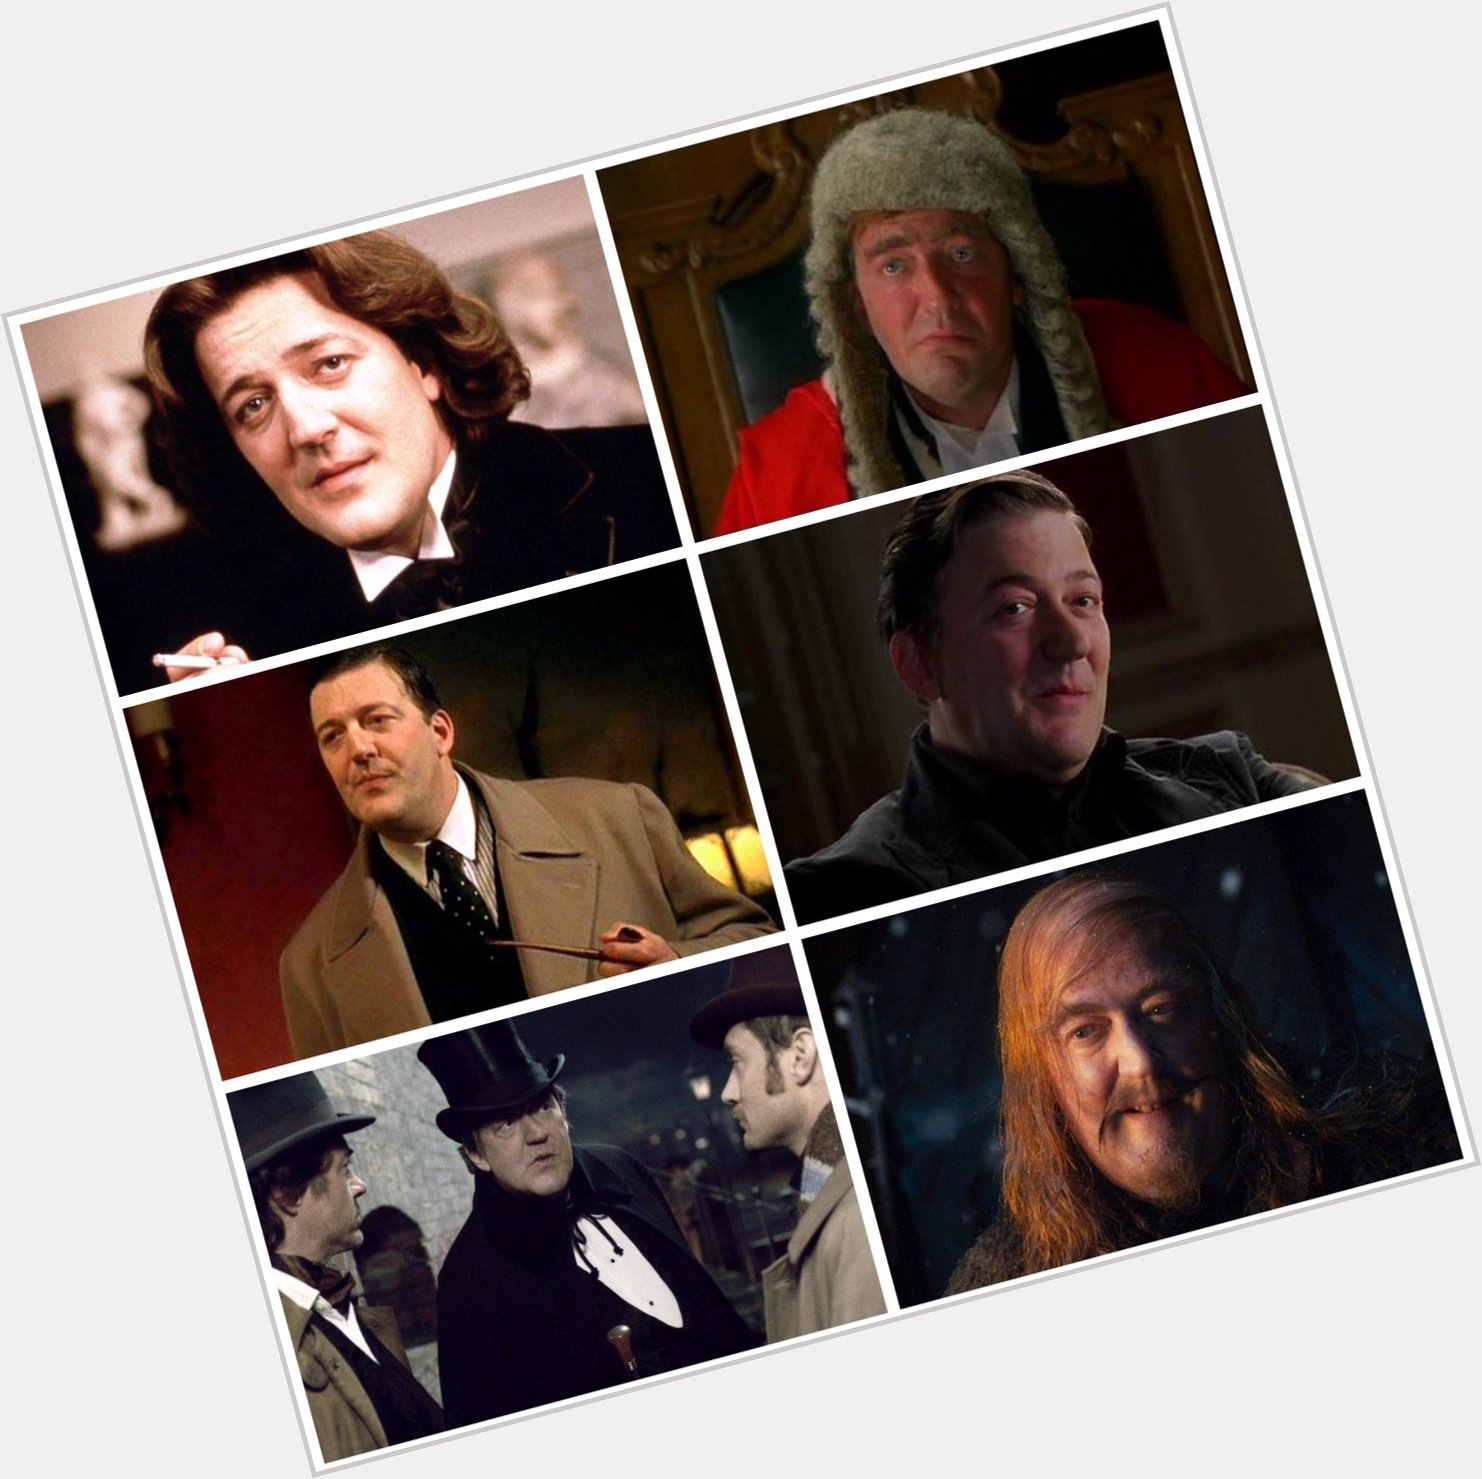  Happy 60th birthday to Stephen Fry! Some highlights in film: 